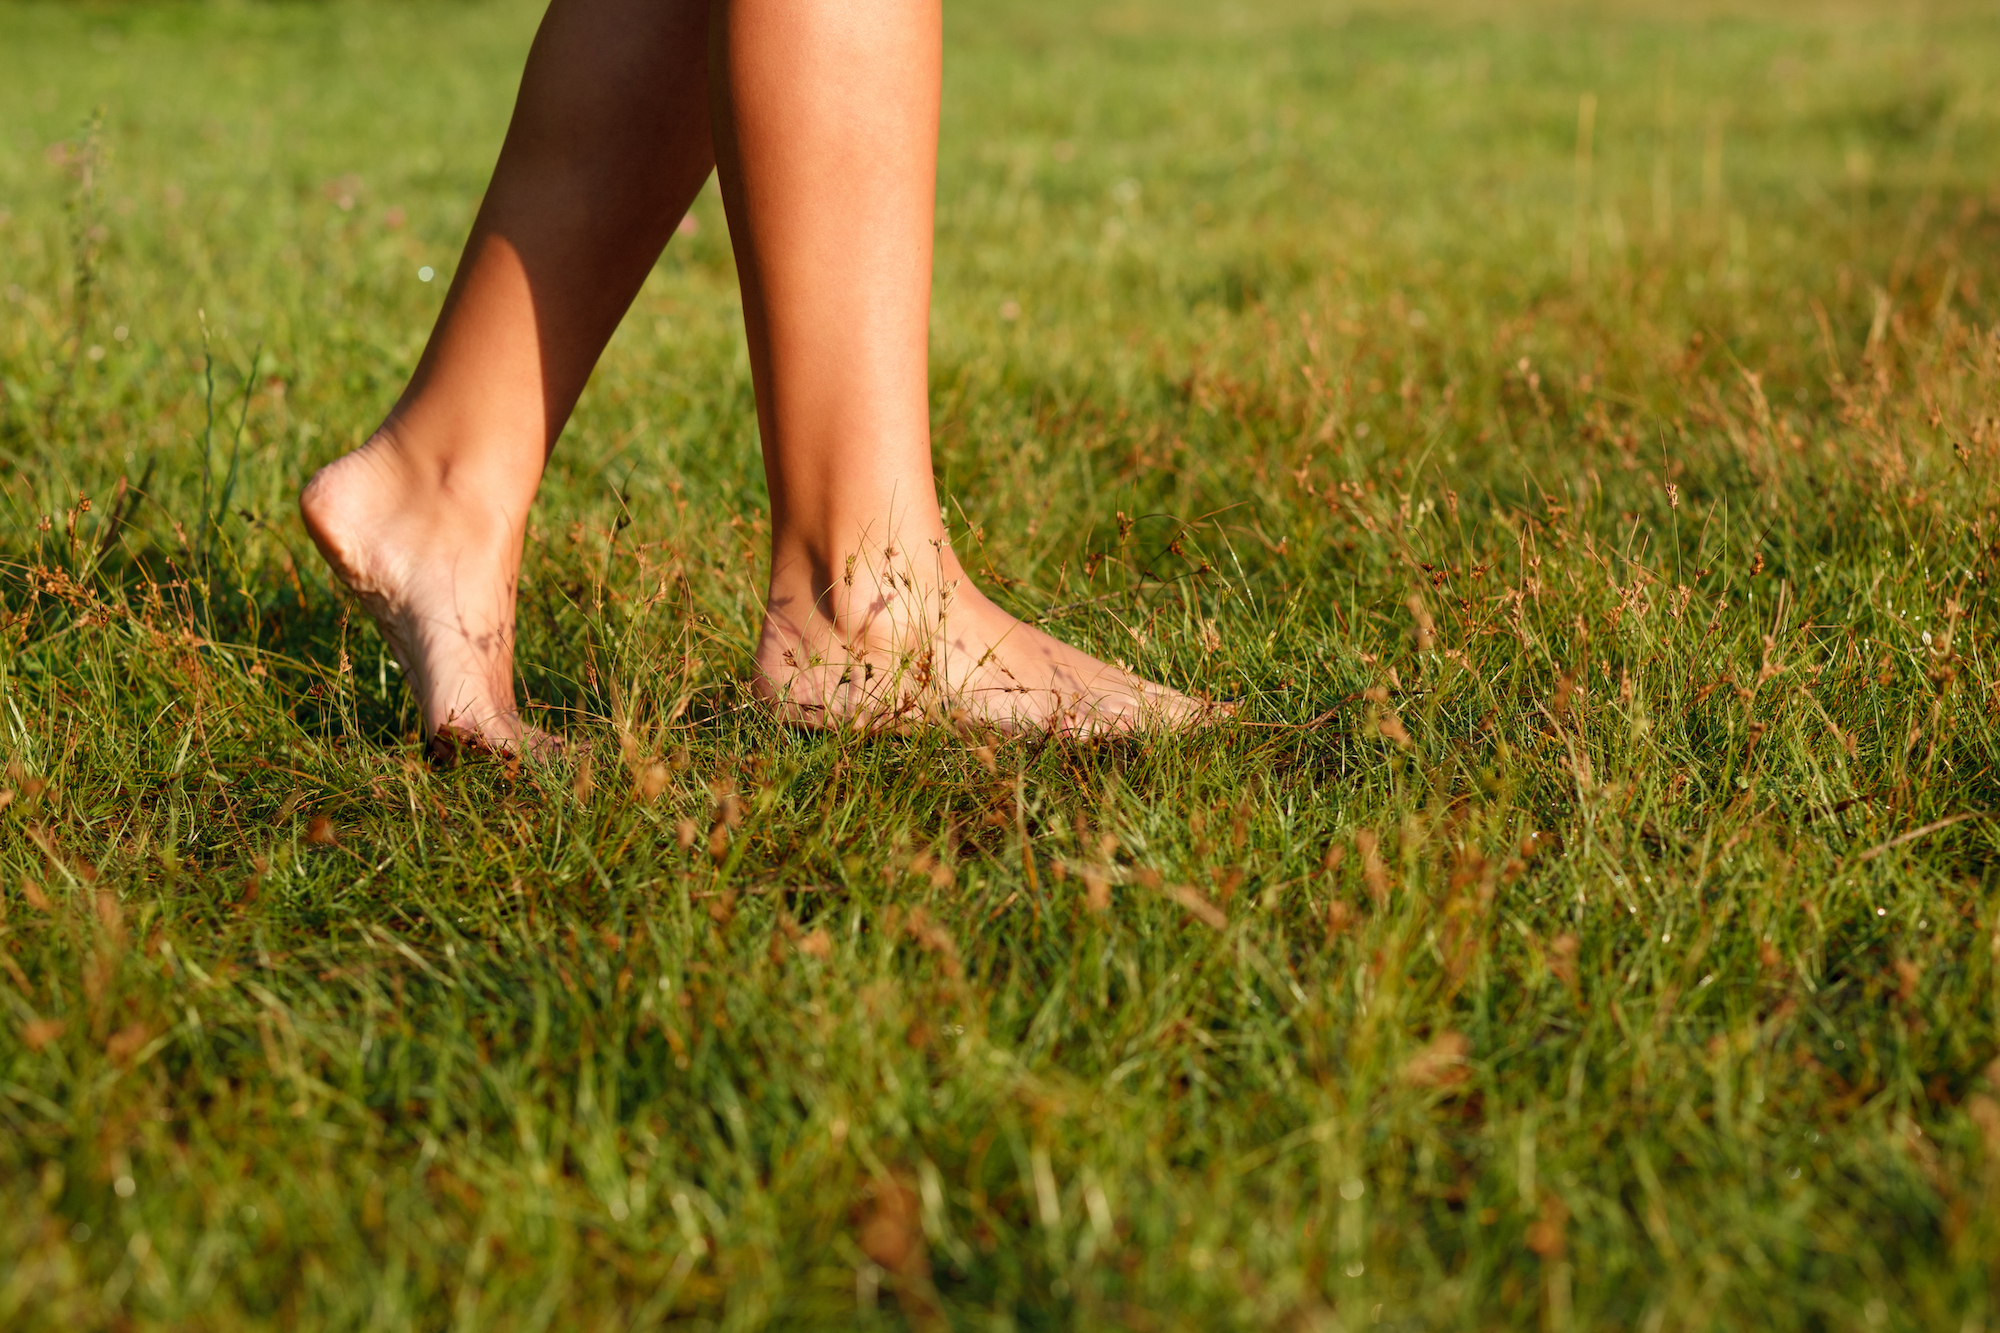 close-up of female legs walking on green grass barefoot